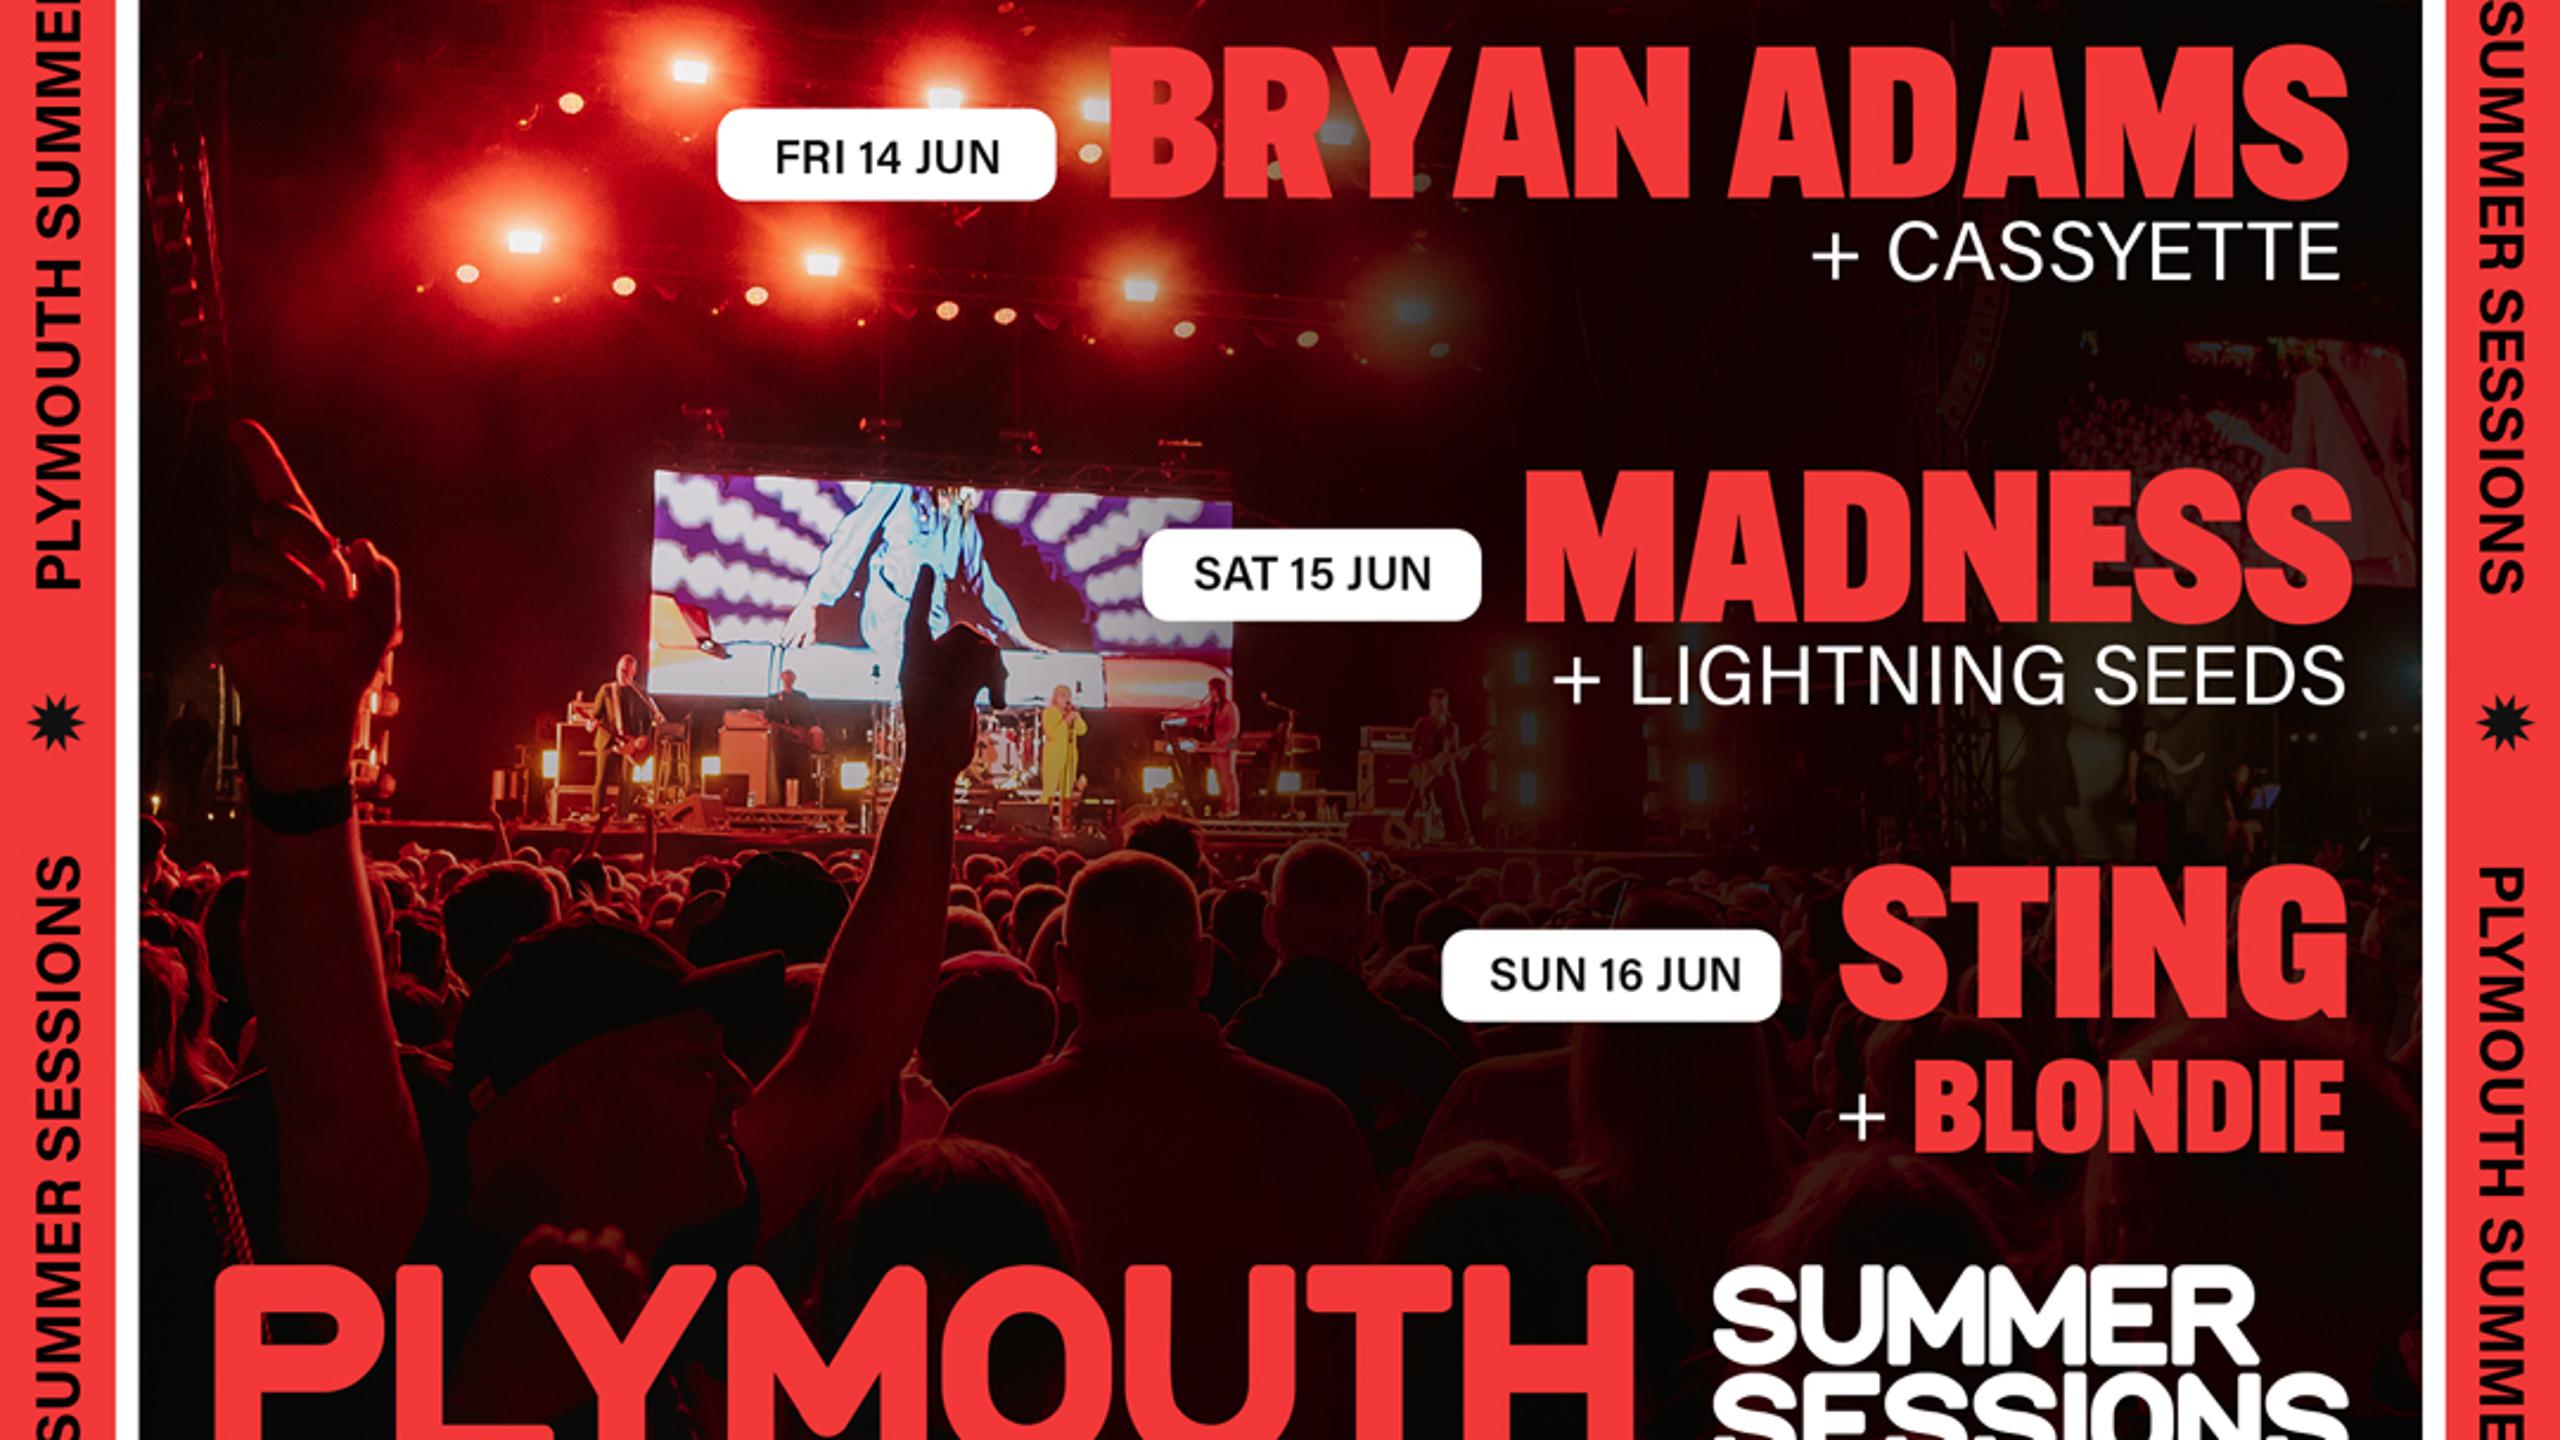 Plymouth Summer Sessions 1701259224.911663.2560x1440 